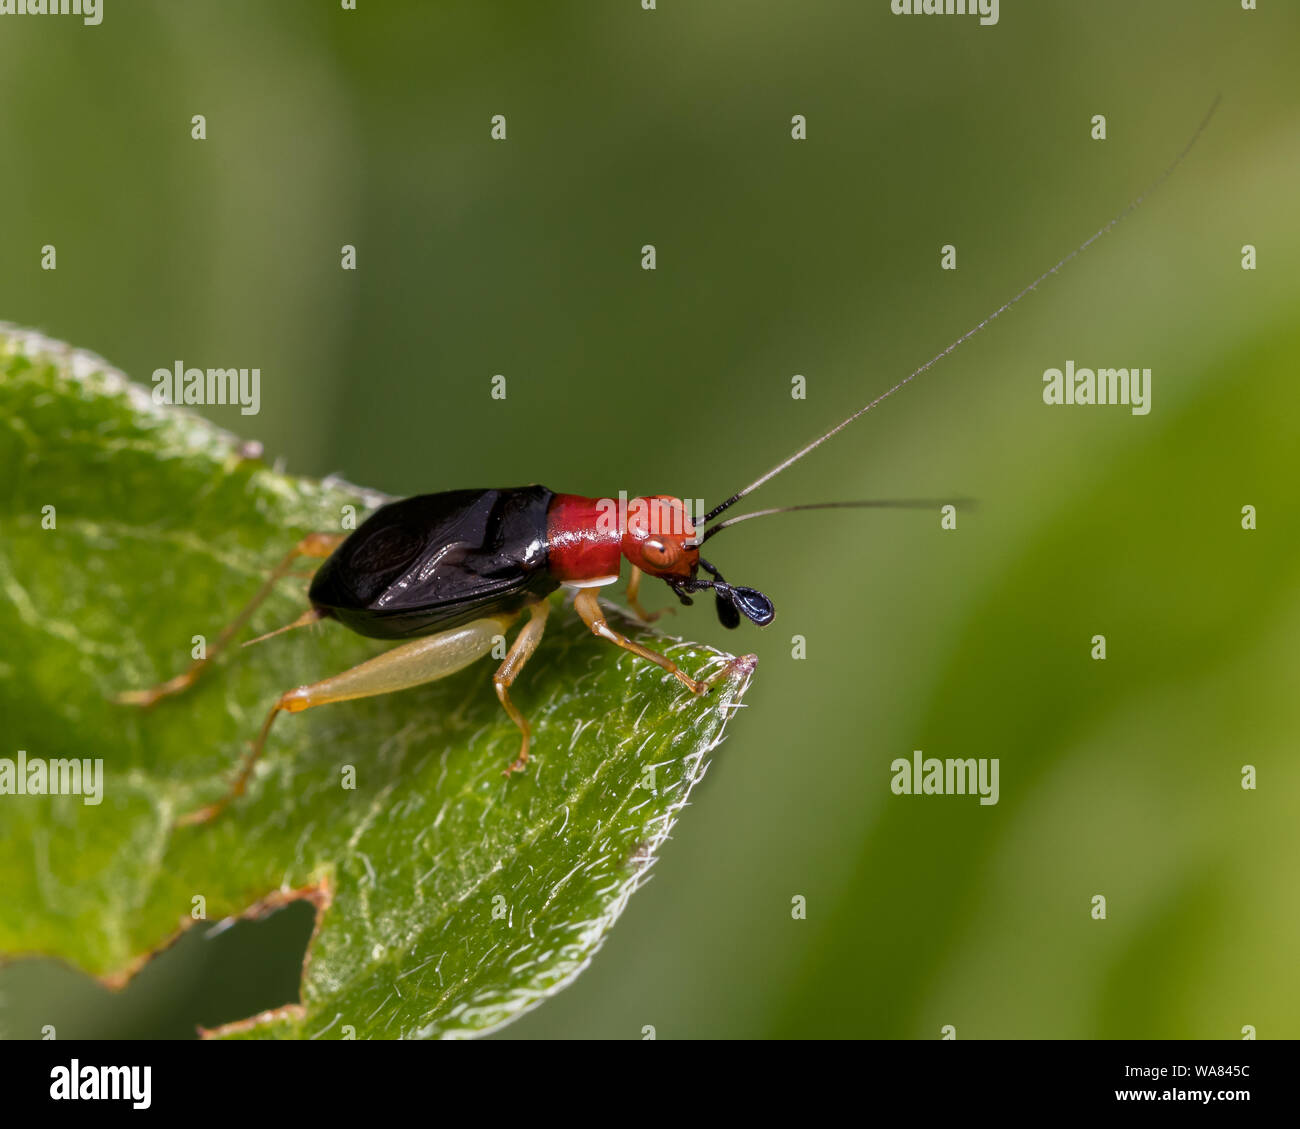 closeup of Red-headed Bush Cricket on the green leaf of a plant Stock Photo